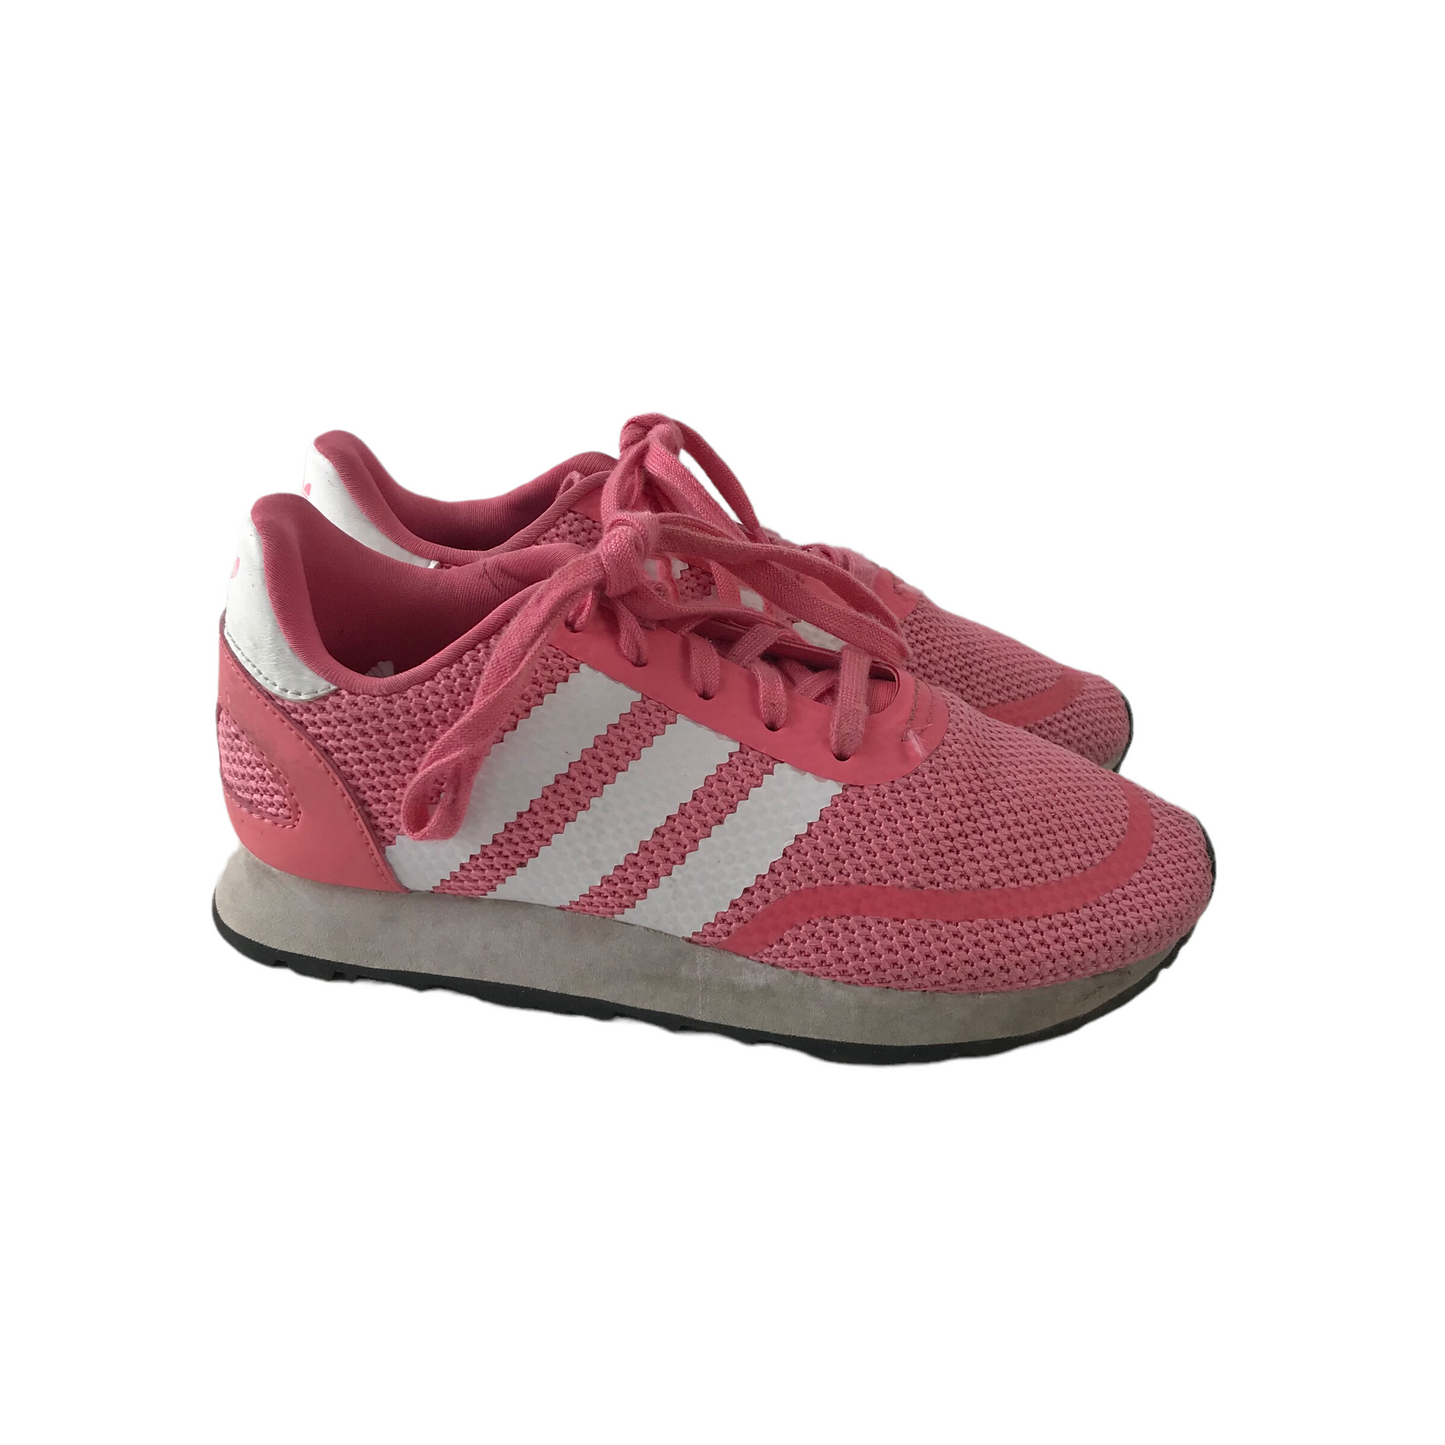 Adidas Pink Trainers Size UK 13K junior